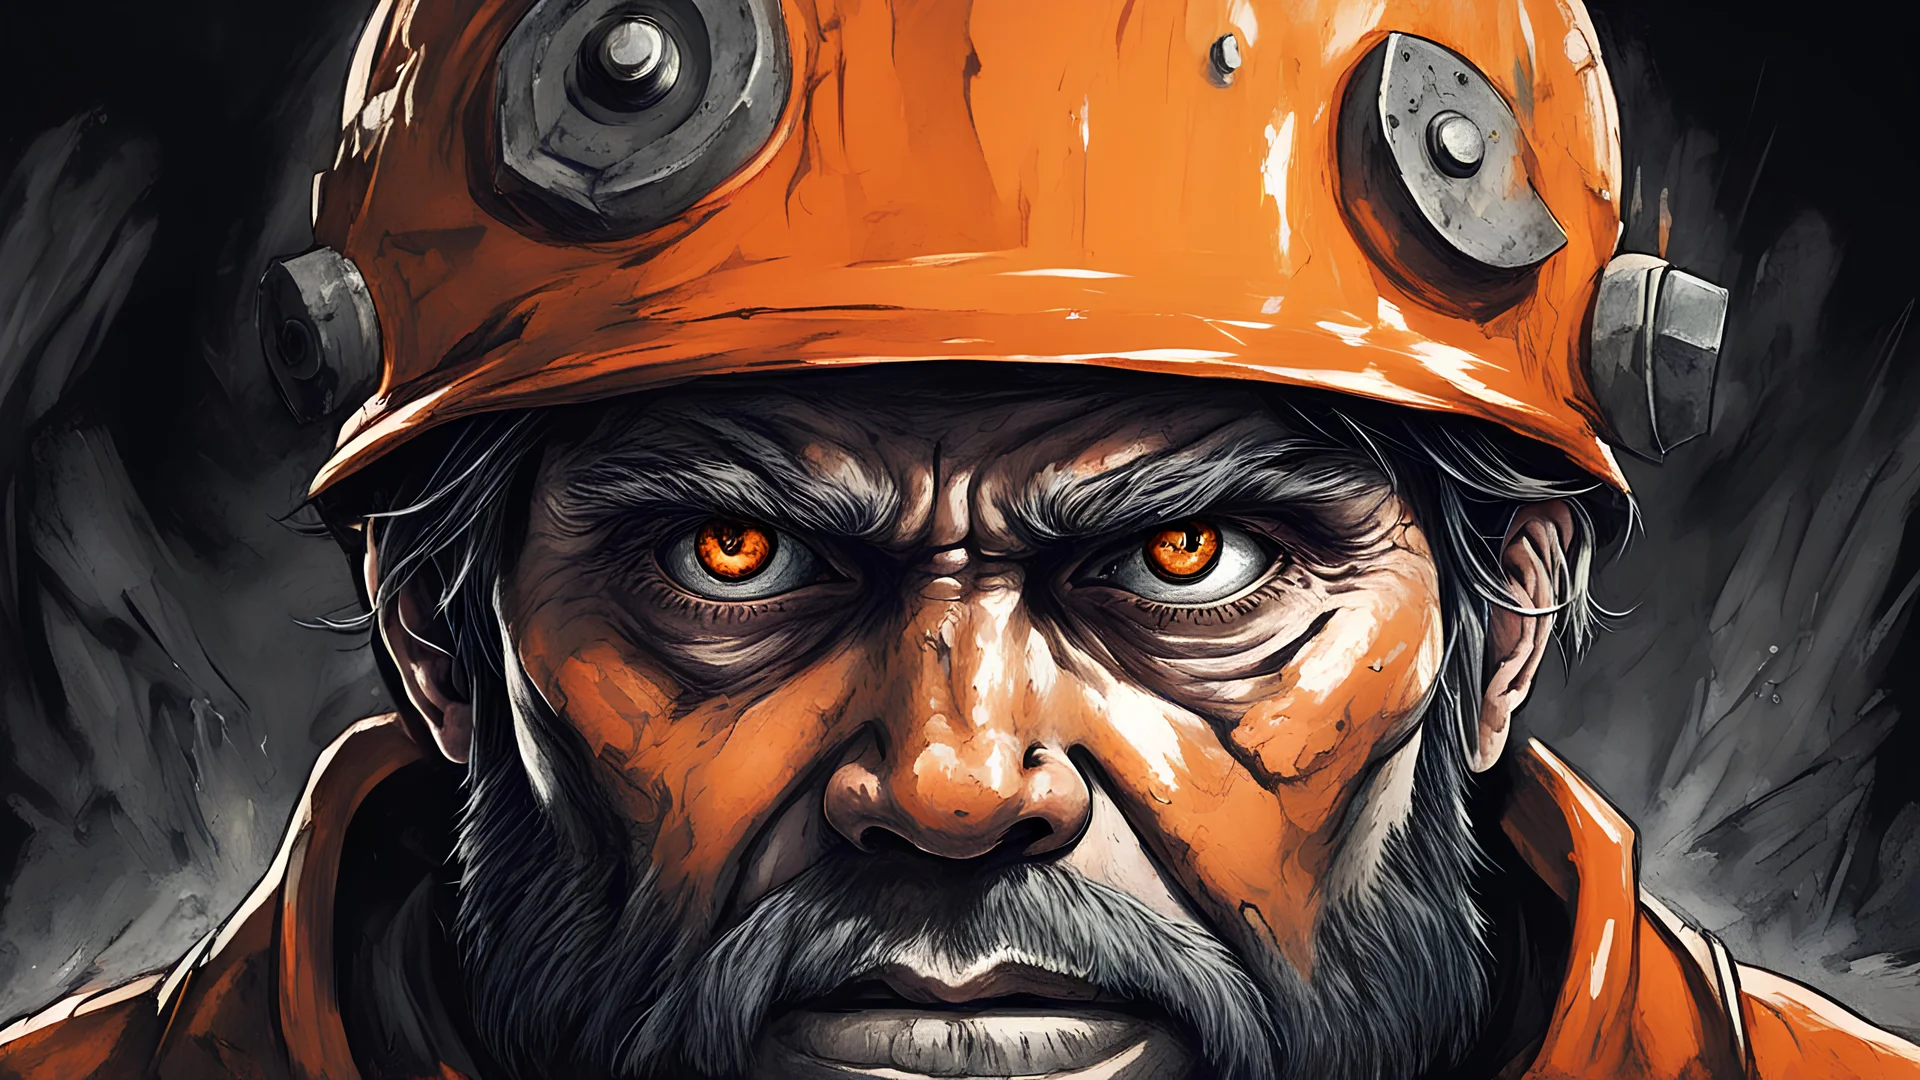 (masterpiece), best quality, expressive eyes, miner, inside mine, eyes close up, fear in eyes, adult men, 40 years man, extreme quality, dark horror art style, horror style, dark art style, Miner inside the mine, look of fear, wearing orange helmet, strong man, strong muscular face, drawing, anime art style